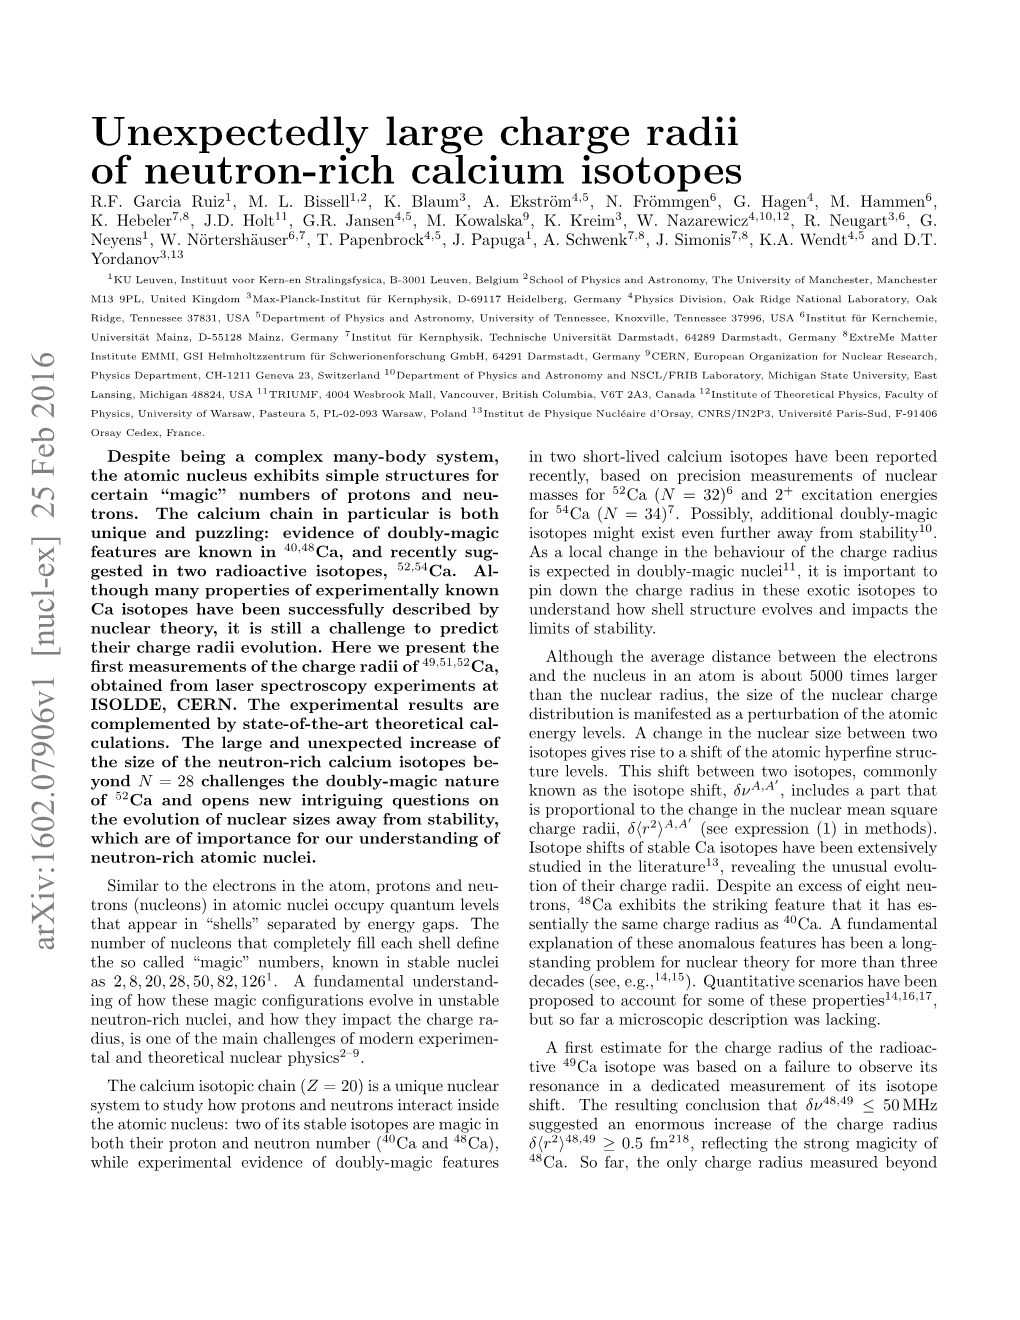 Unexpectedly Large Charge Radii of Neutron-Rich Calcium Isotopes R.F